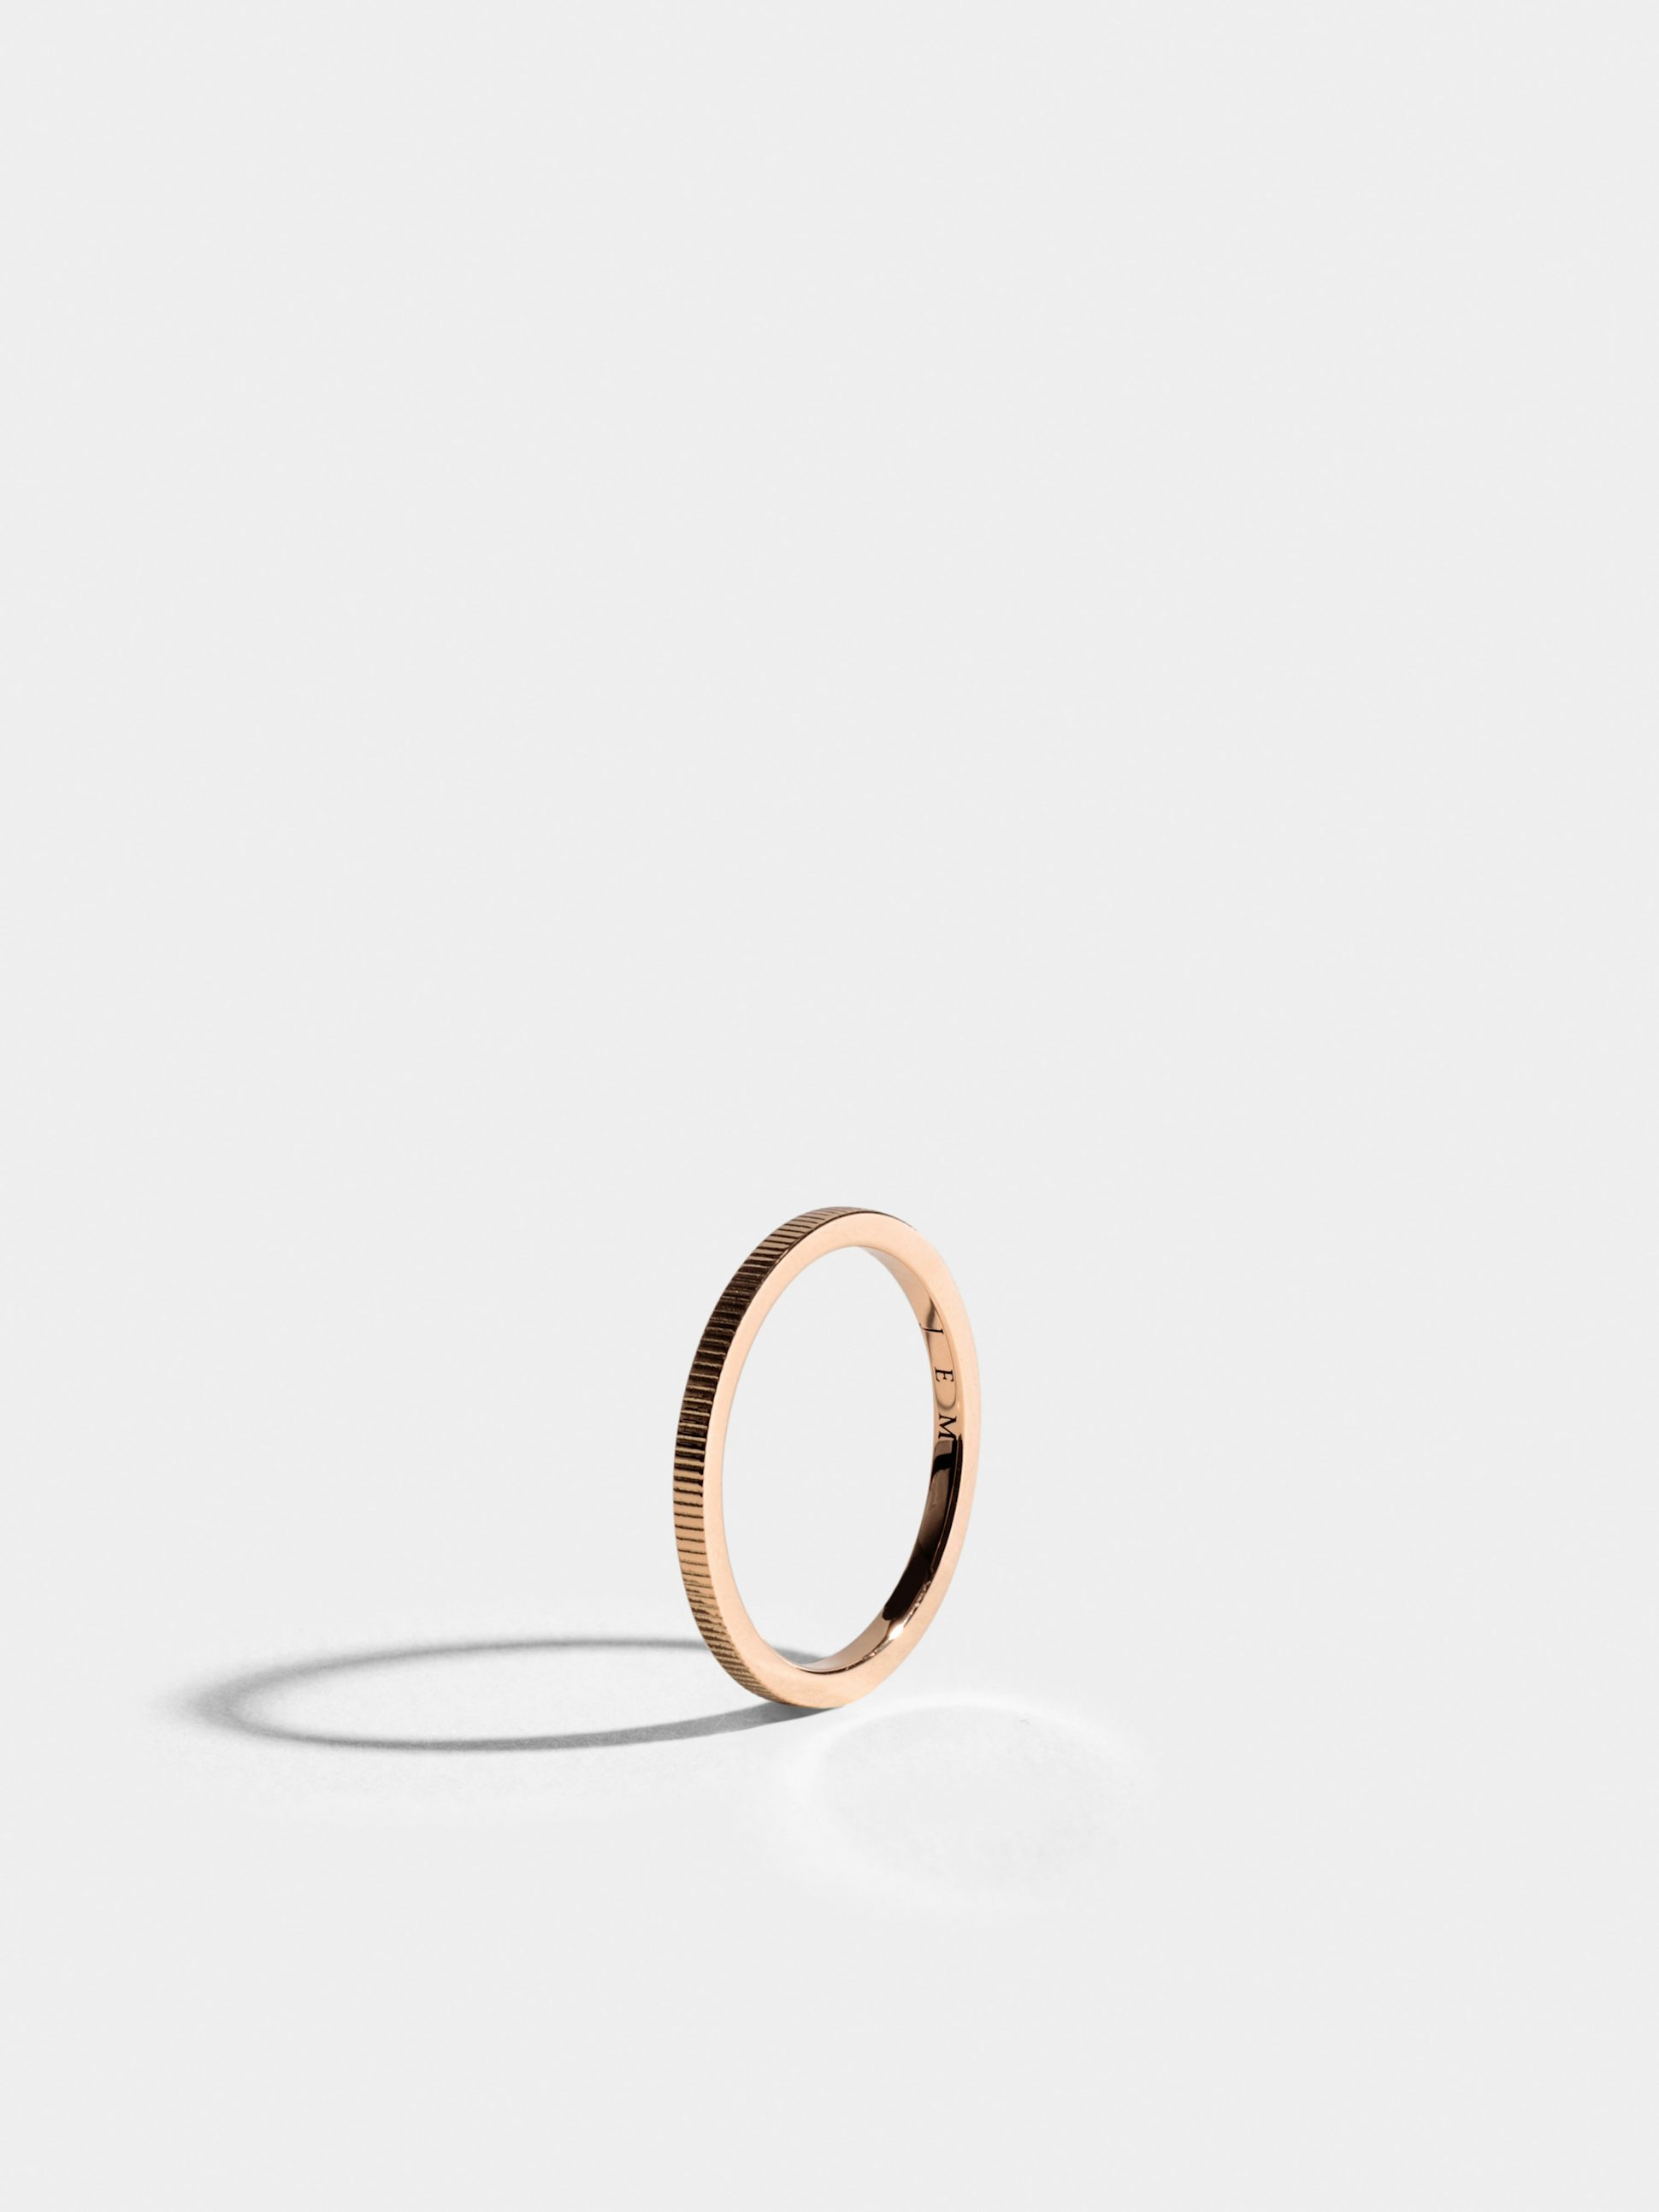 Anagramme ridges ring in 18k Fairmined ethical rose gold